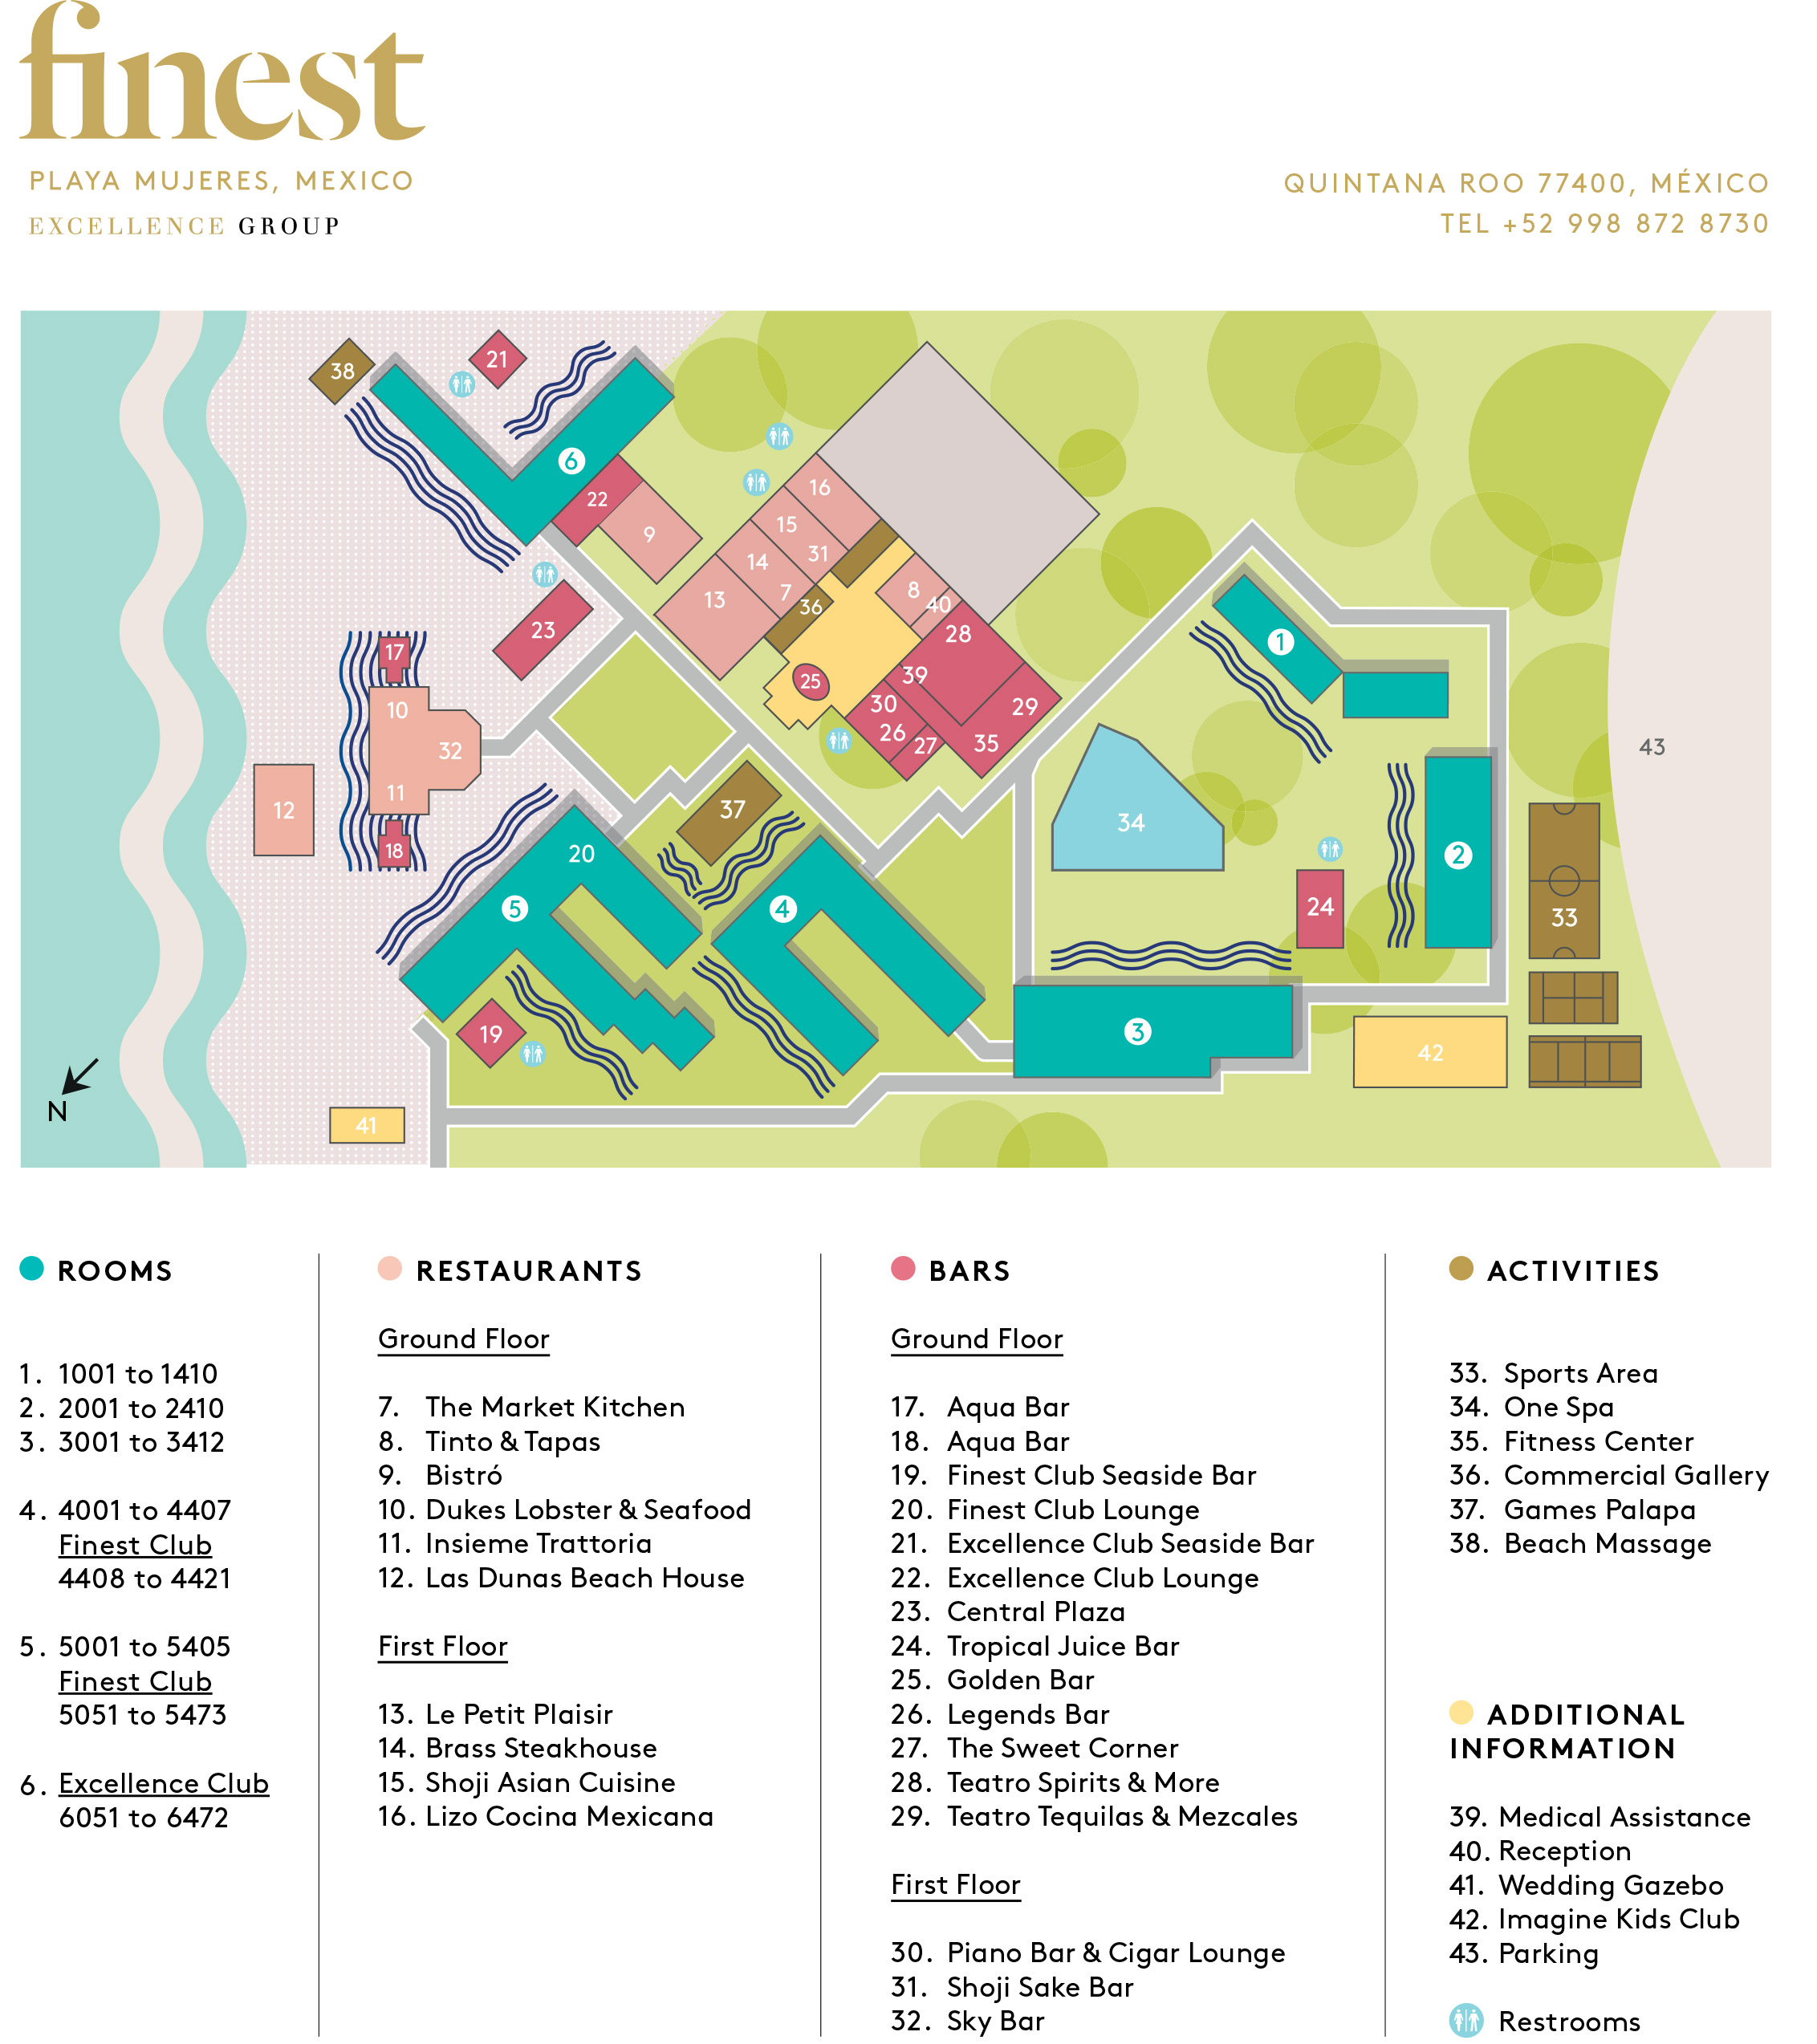 Finest Playa Mujeres Resort Map.aspx?width=2264&height=&ext= 